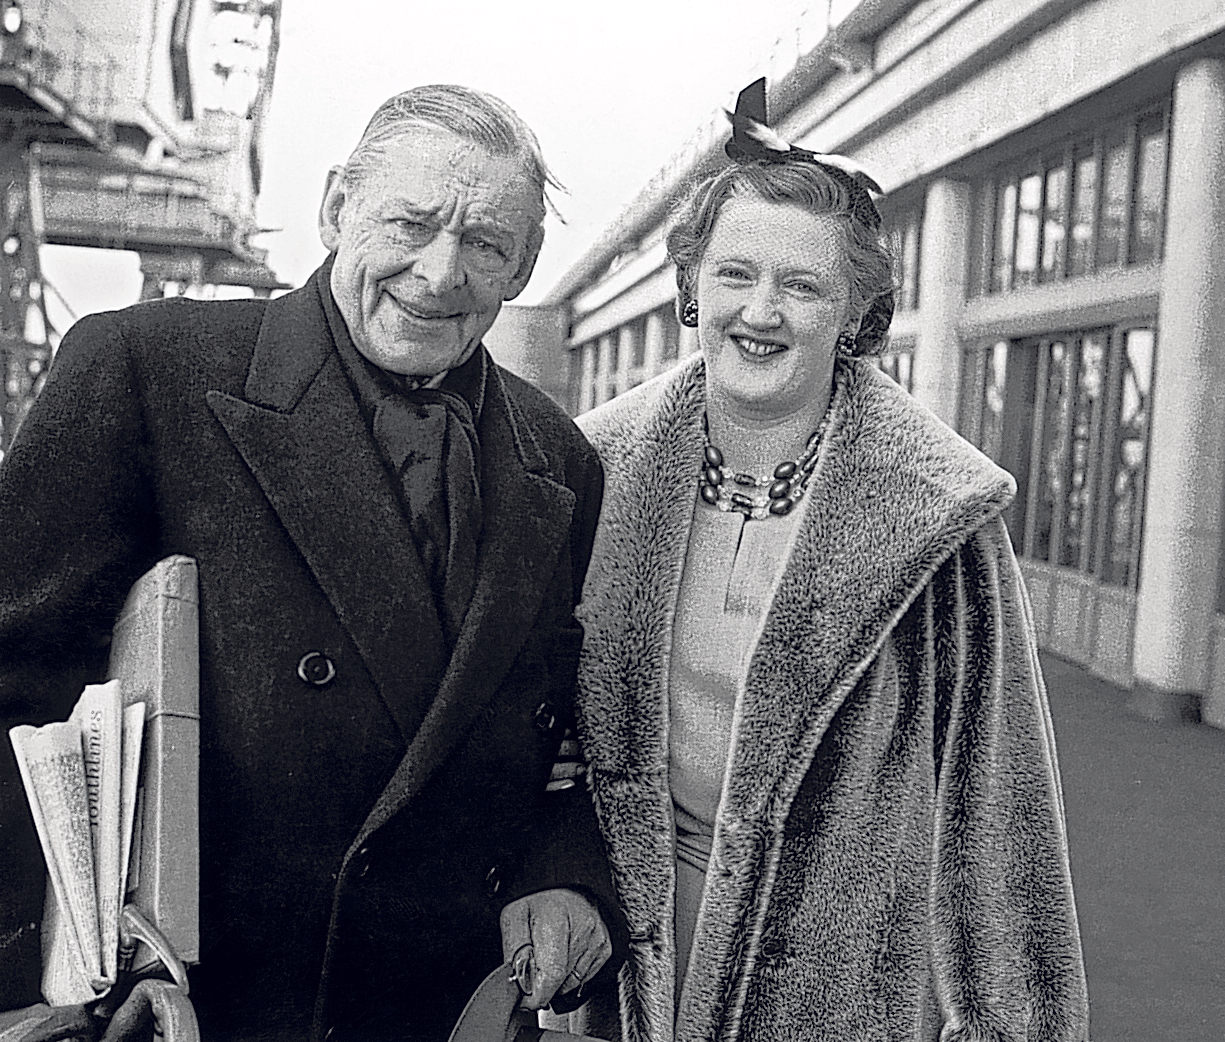 TS Eliot and Valerie at Southampton docks in 1961; 'I am the luckiest man in the world', he said